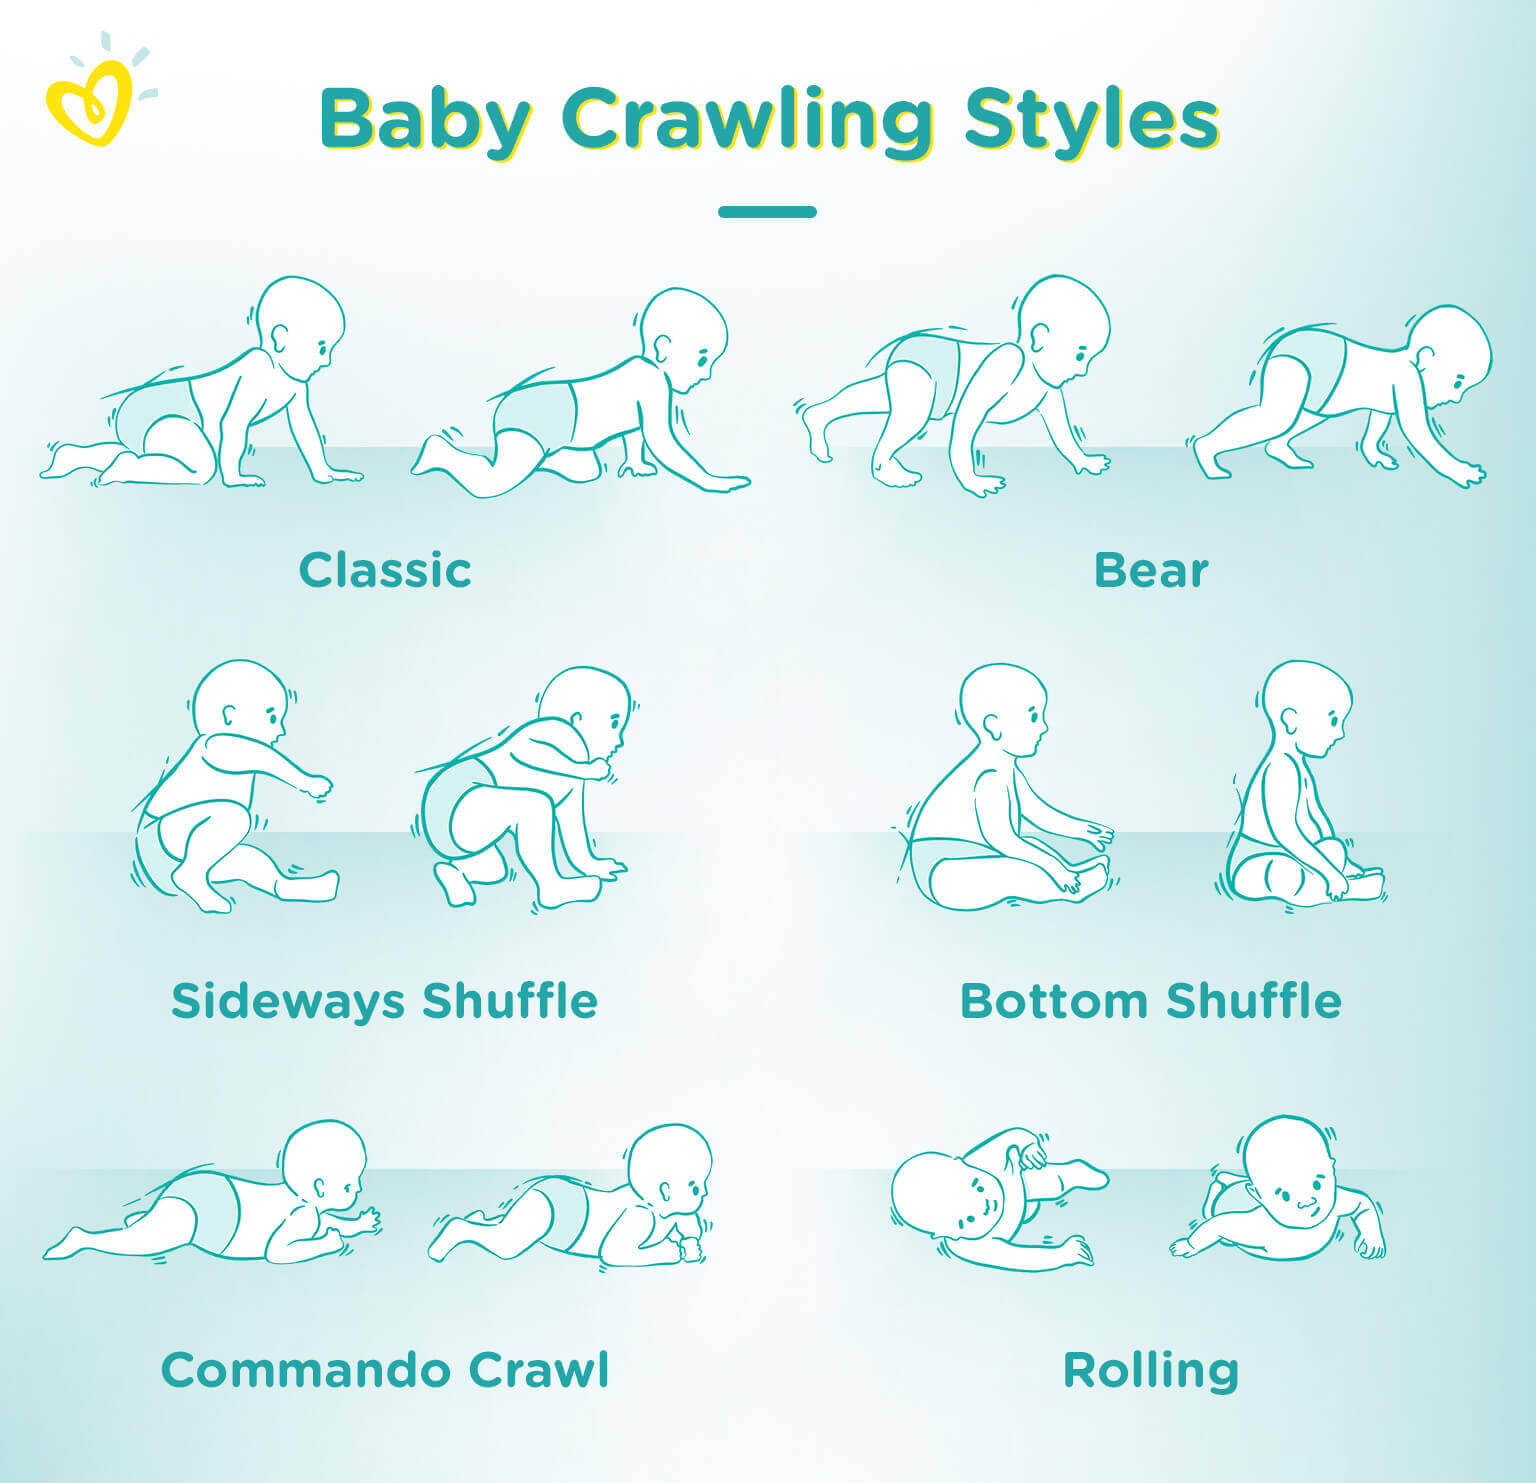 How many stages of crawling are there?